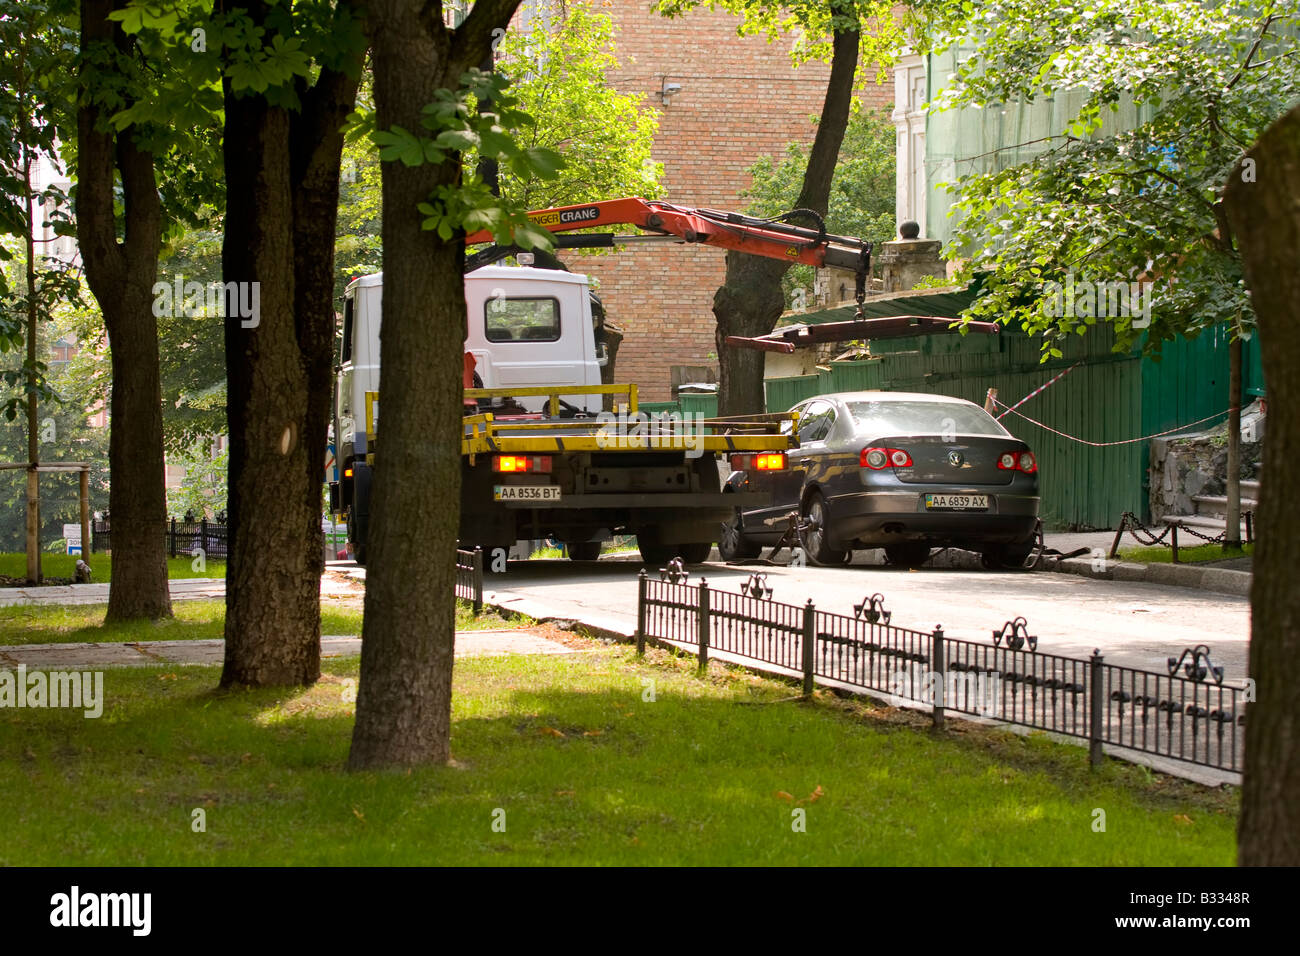 Tow truck lifting a car in an urban park area in Kyiv, surrounded by greenery. Stock Photo